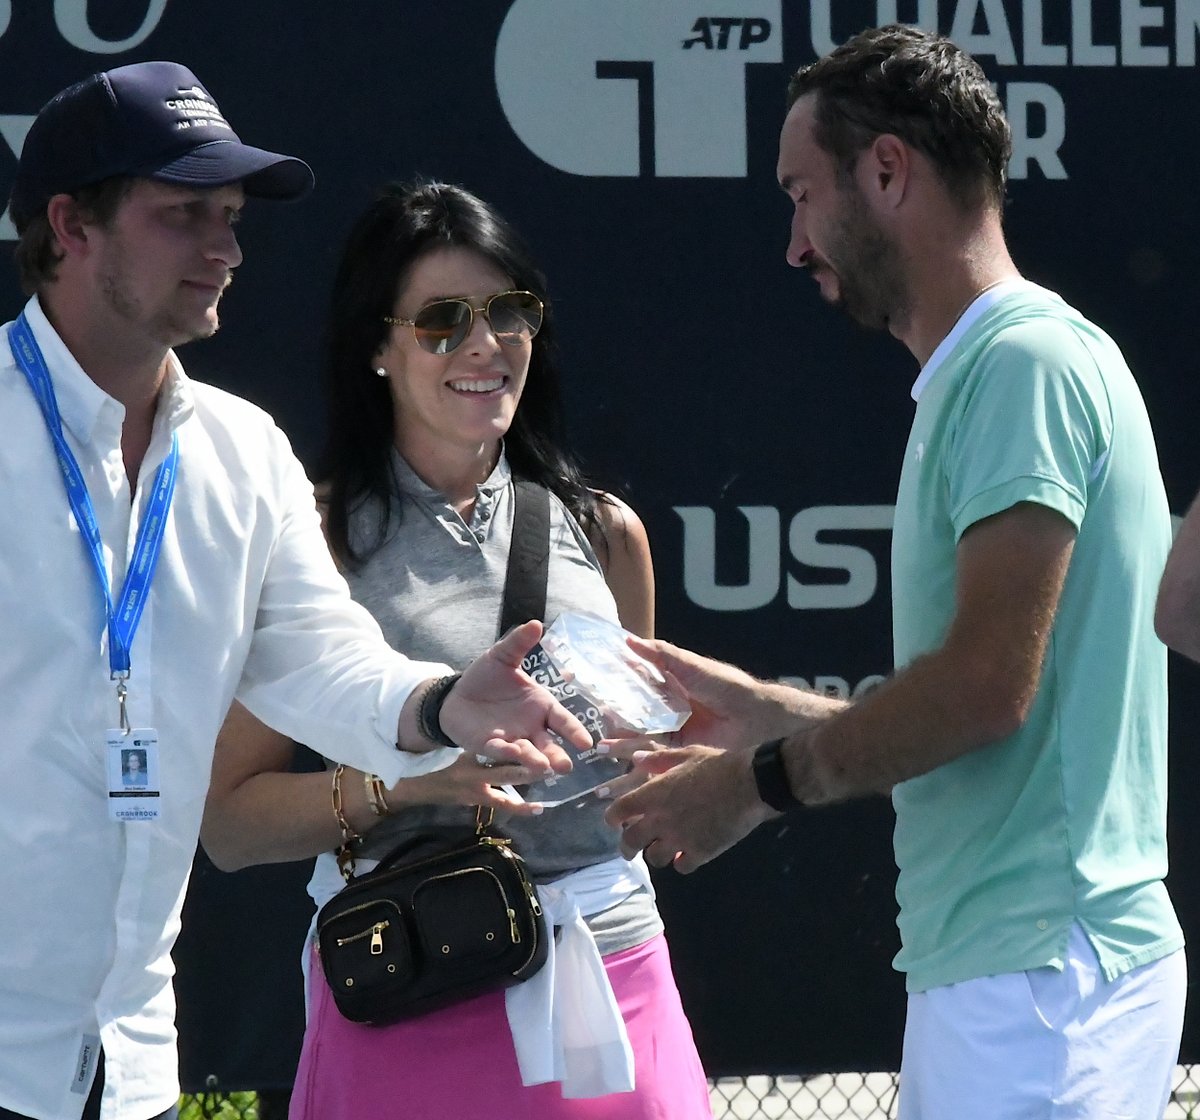 PRO TENNIS: Organizers announce run-back for Cranbrook Tennis Classic, after last year's successful debut for new @ATPChallenger event >> bit.ly/3UzTiC7